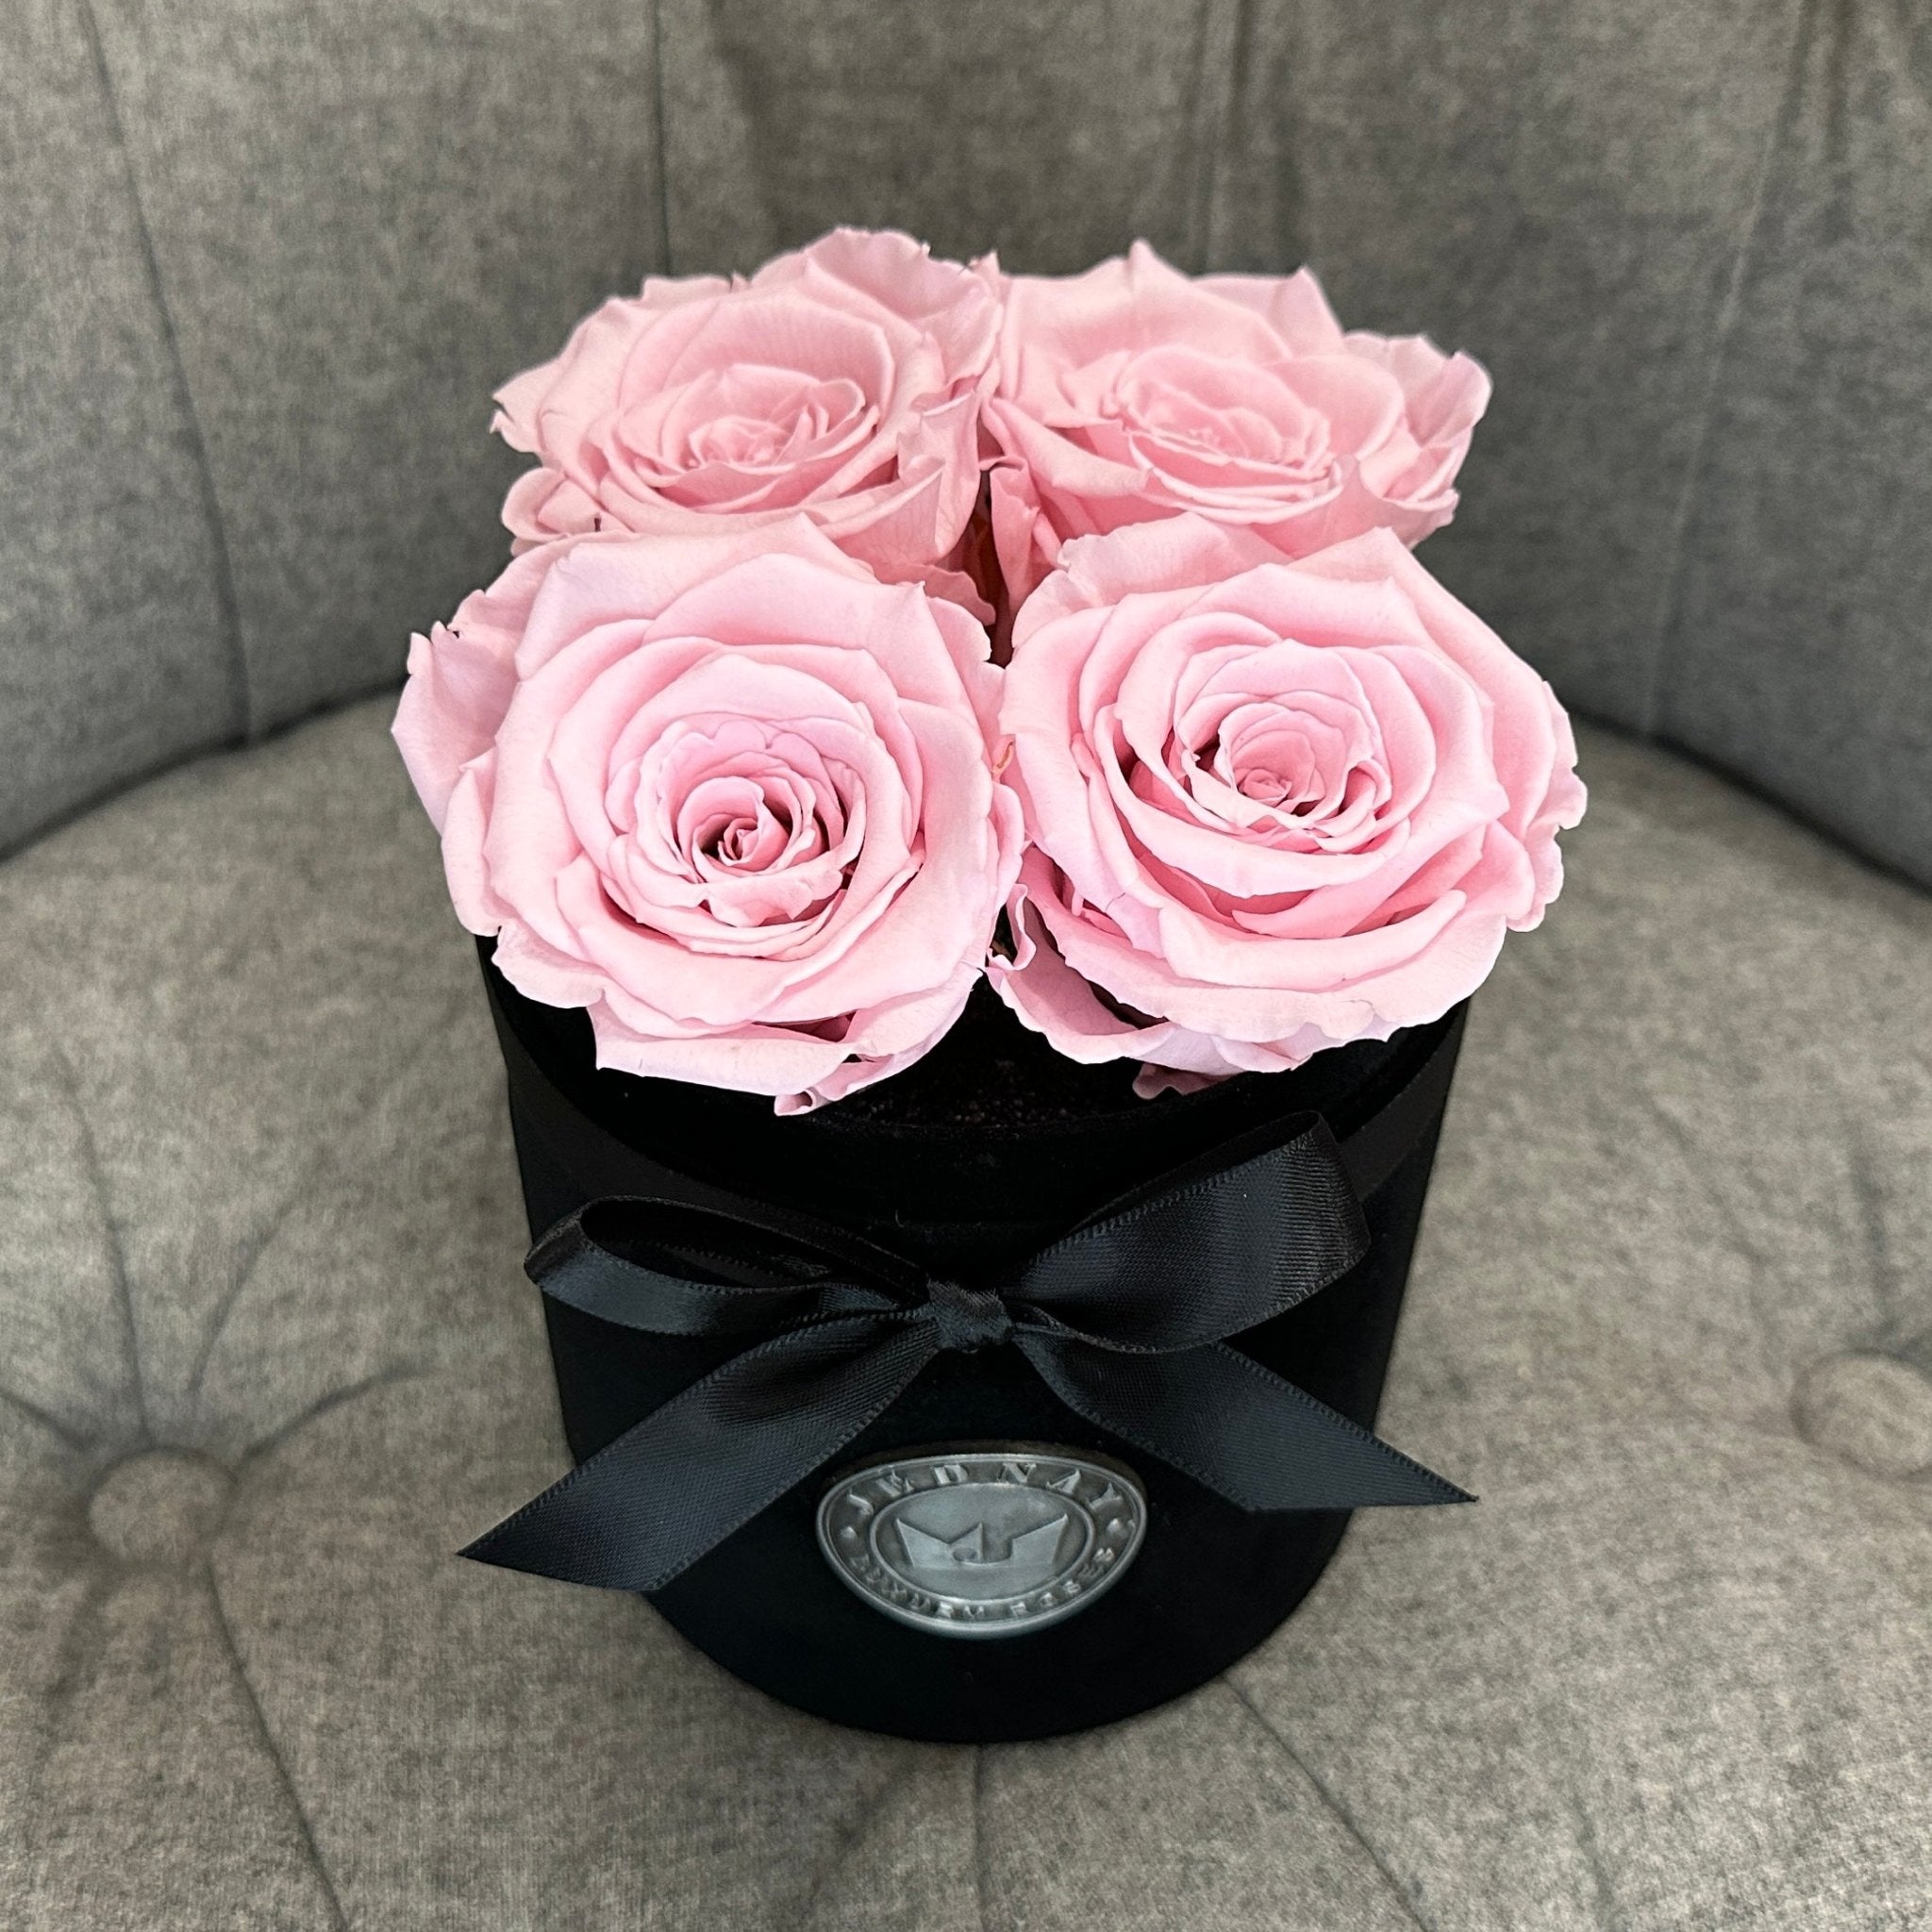 Petite Black Suede Forever Rose Box - Soft Pink Eternal Roses - Jednay Roses